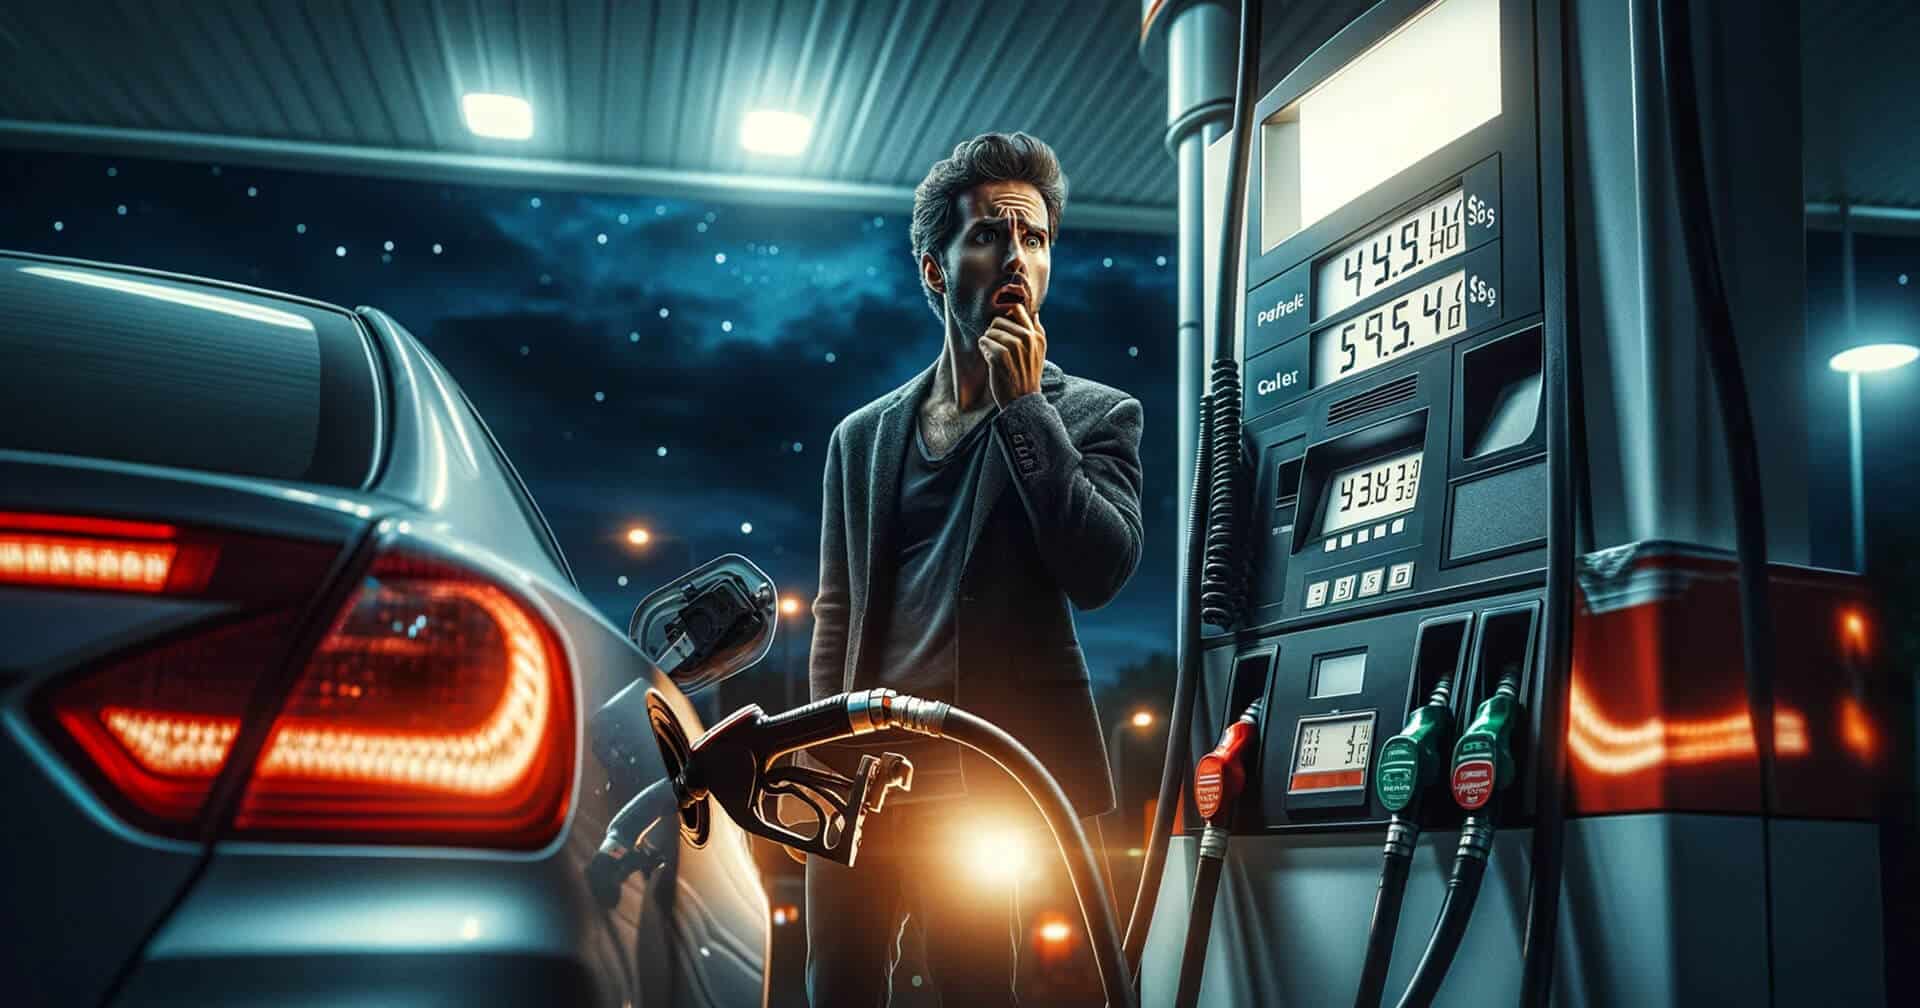 A man is filling up his automotive at a gas station at night.